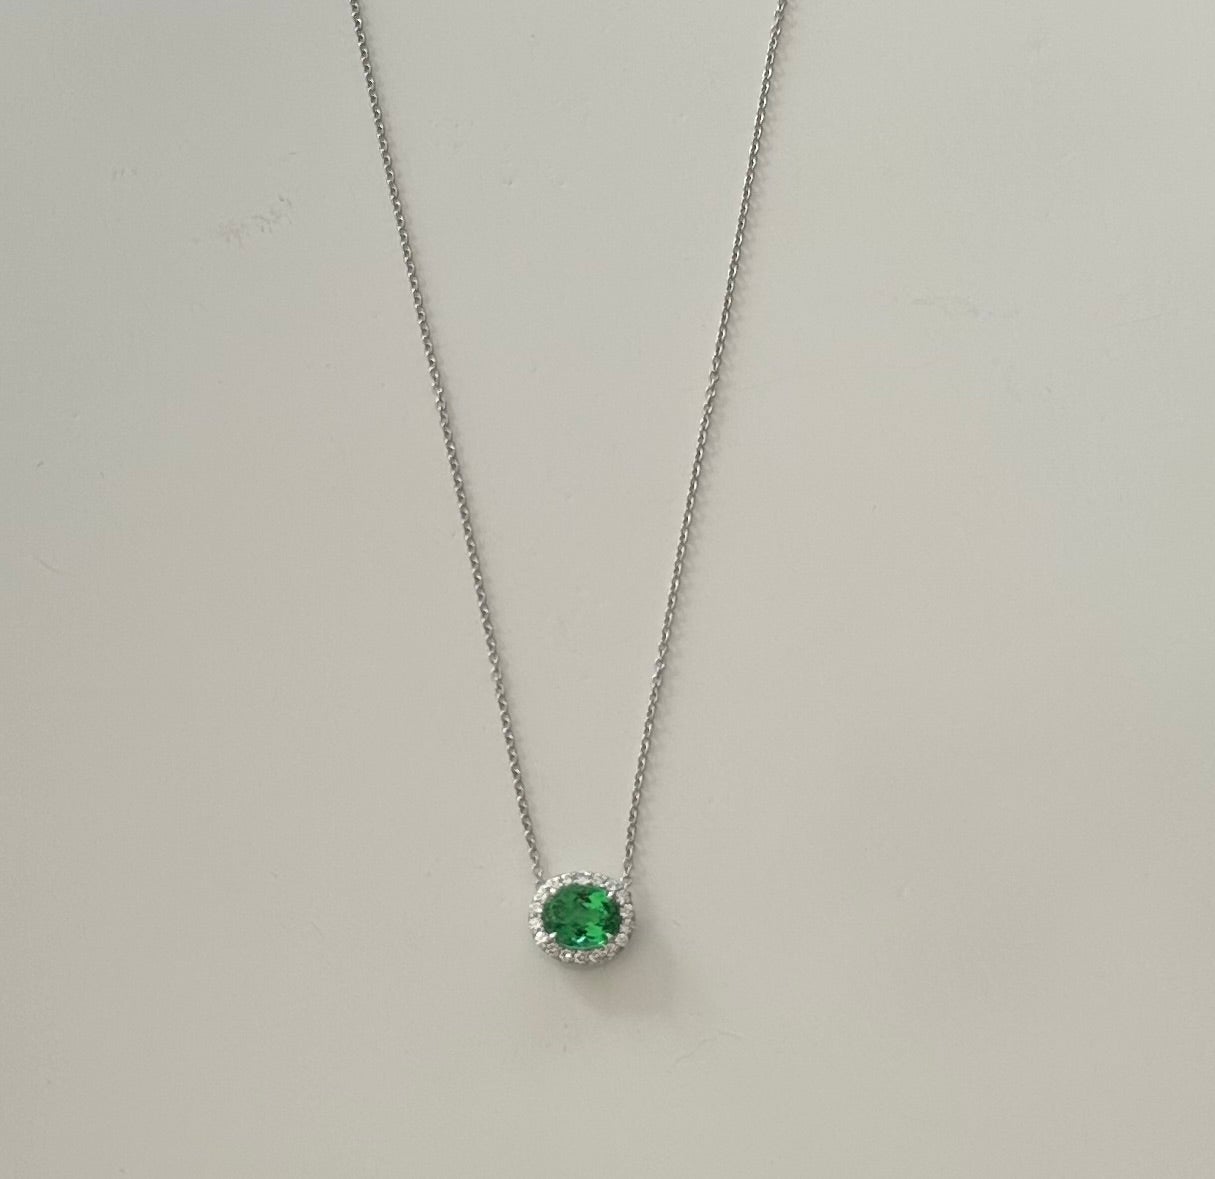 Handcrafted in platinum, this exquisite pendant necklace features a 1.46-carat natural green oval-shaped paraiba surrounded by a halo of eighteen round diamonds totaling 0.18 carats, GH color, VS clarity. The paraiba is certified by the American